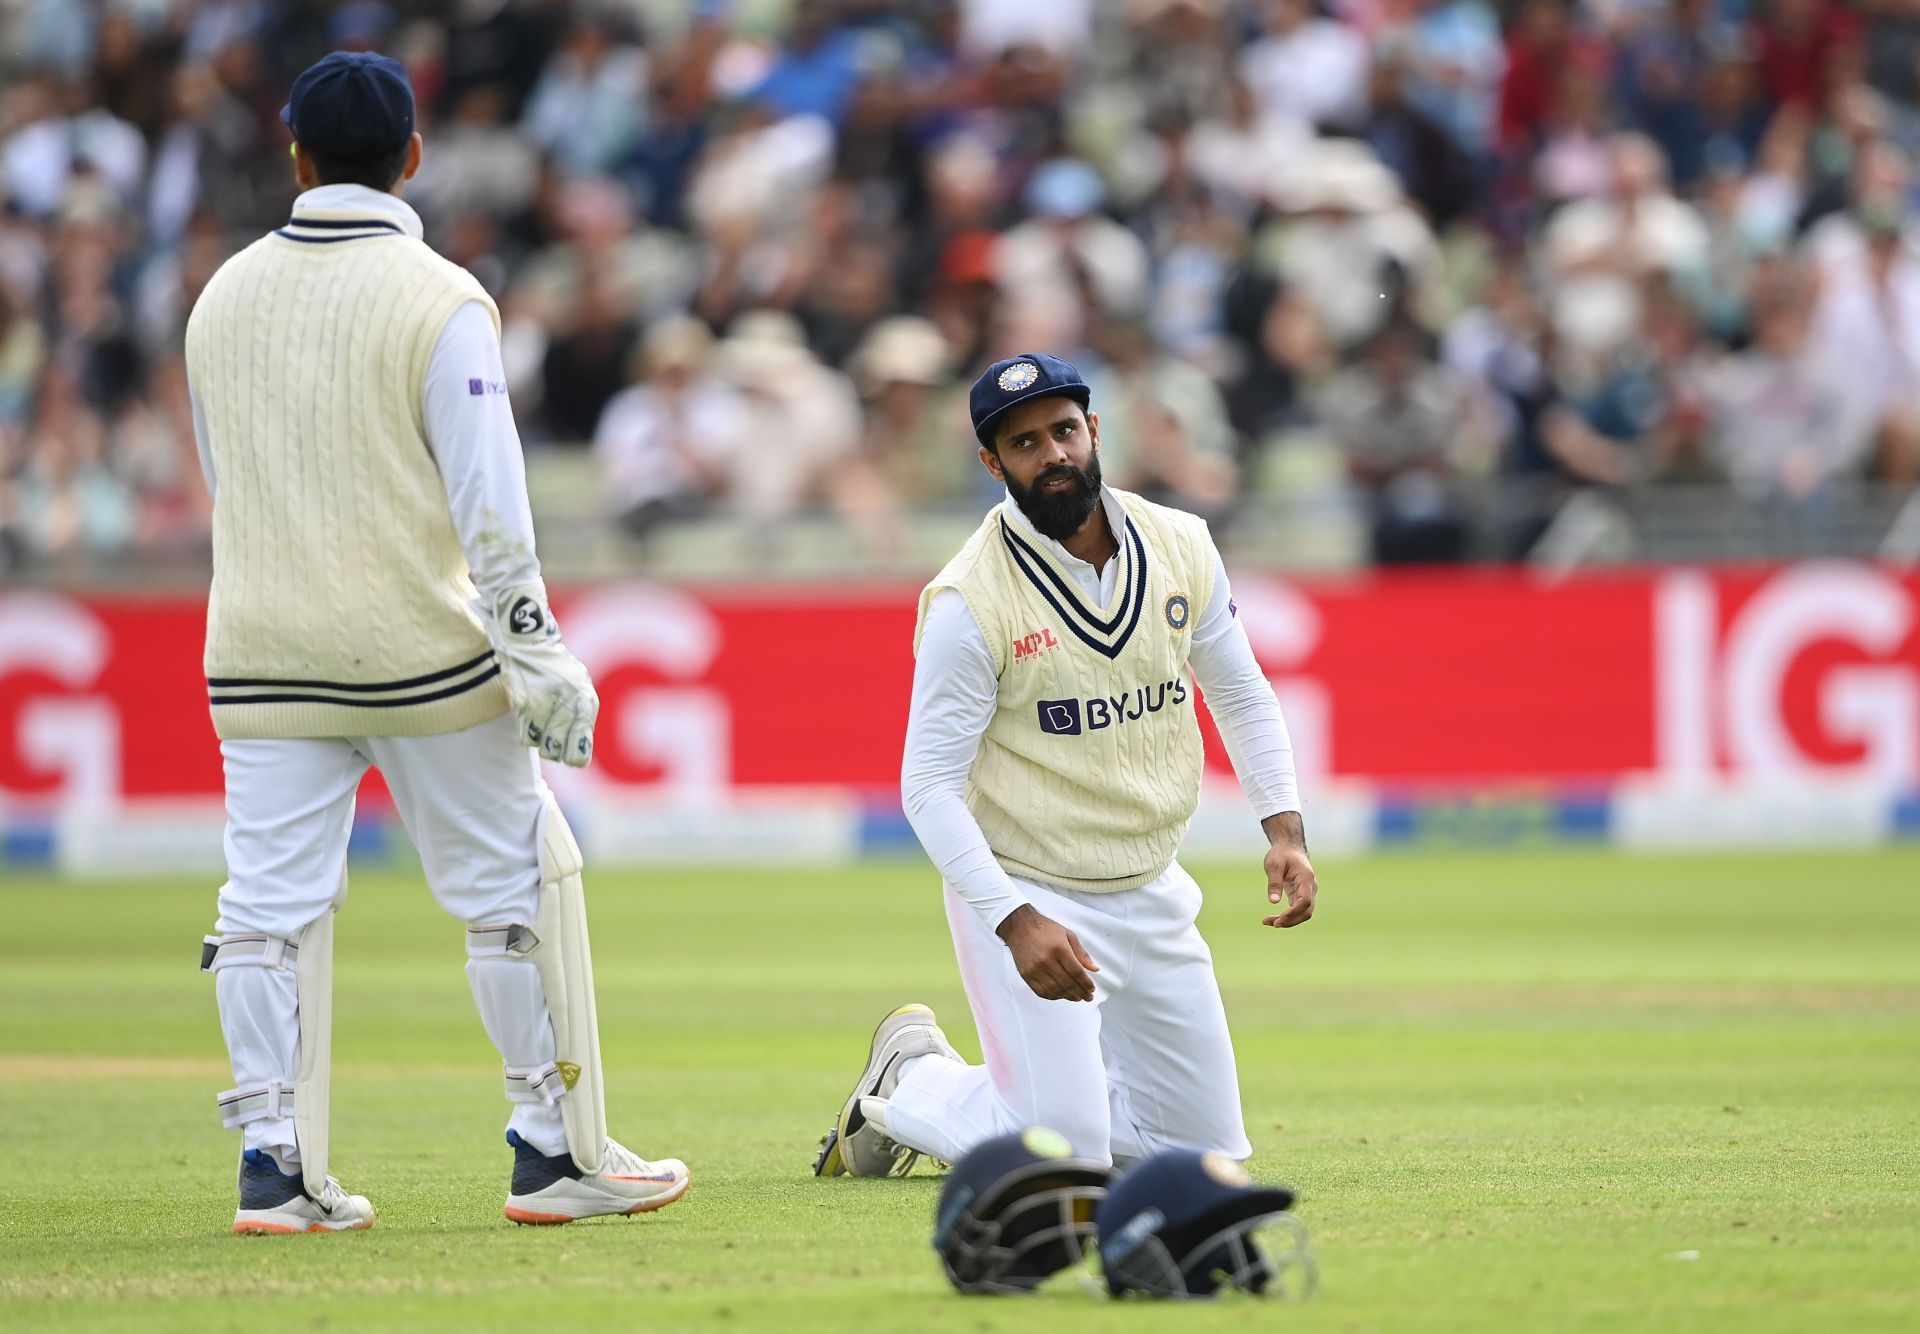 England vs India - Fifth LV= Insurance Test Match: Day Four (Image: Getty)